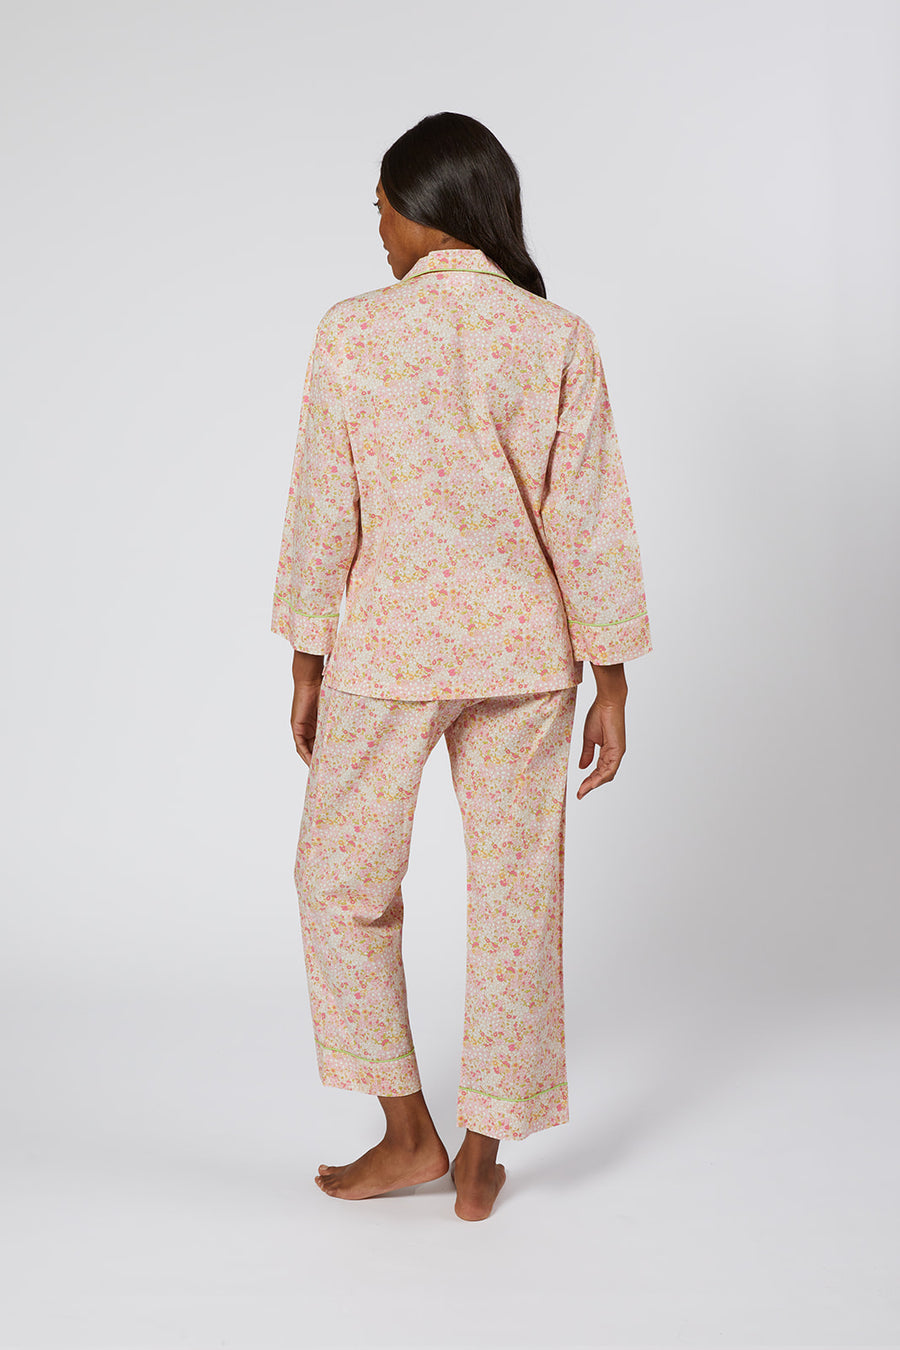 CLASSIC COTTON PAJAMAS IN PINK LIBERTY FLORAL